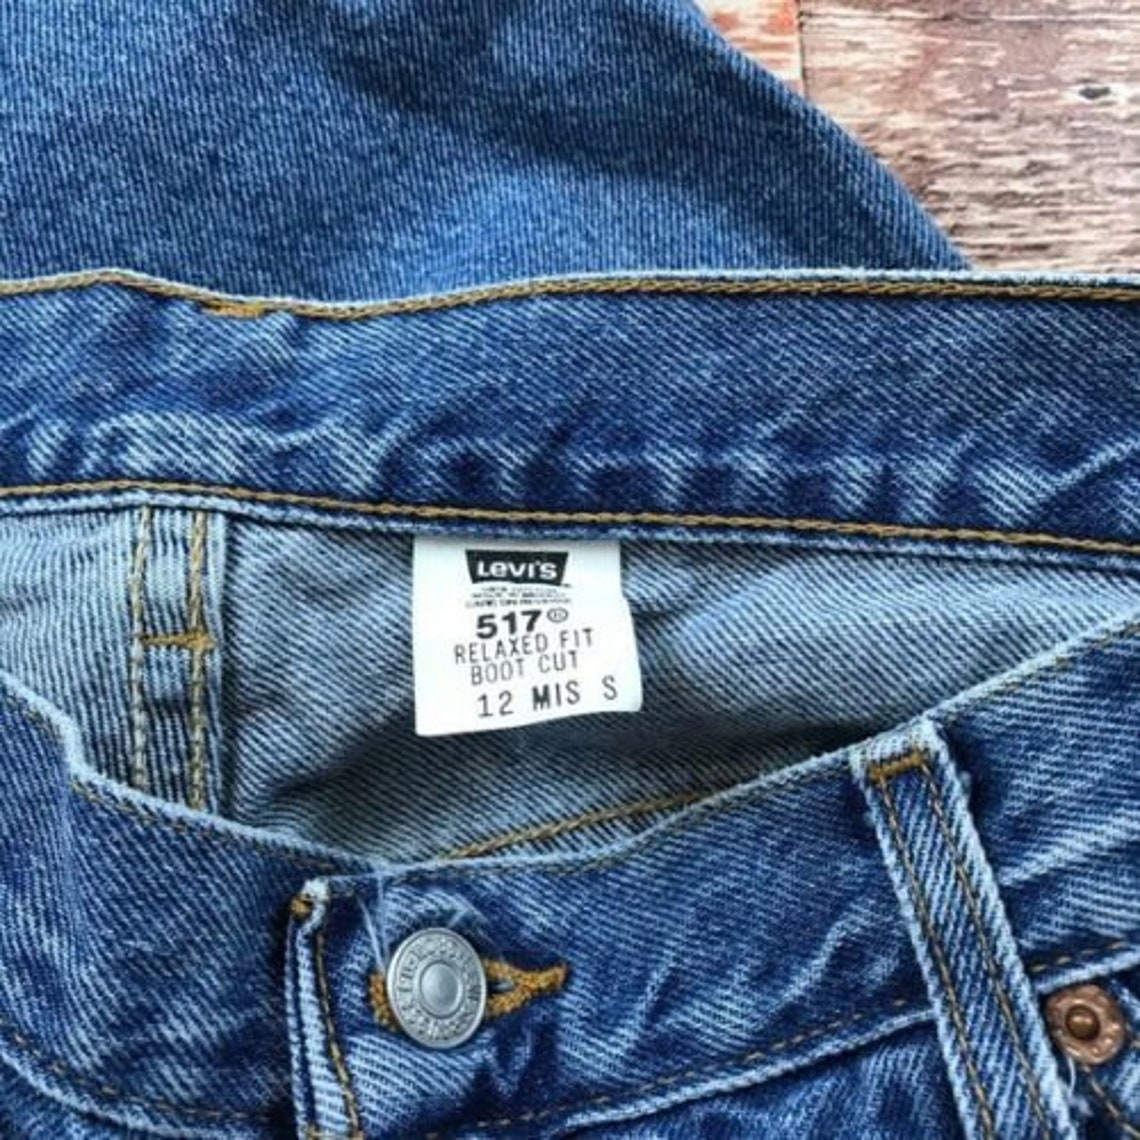 Vintage Levis 517 Cropped Bootleg Jeans | Etsy